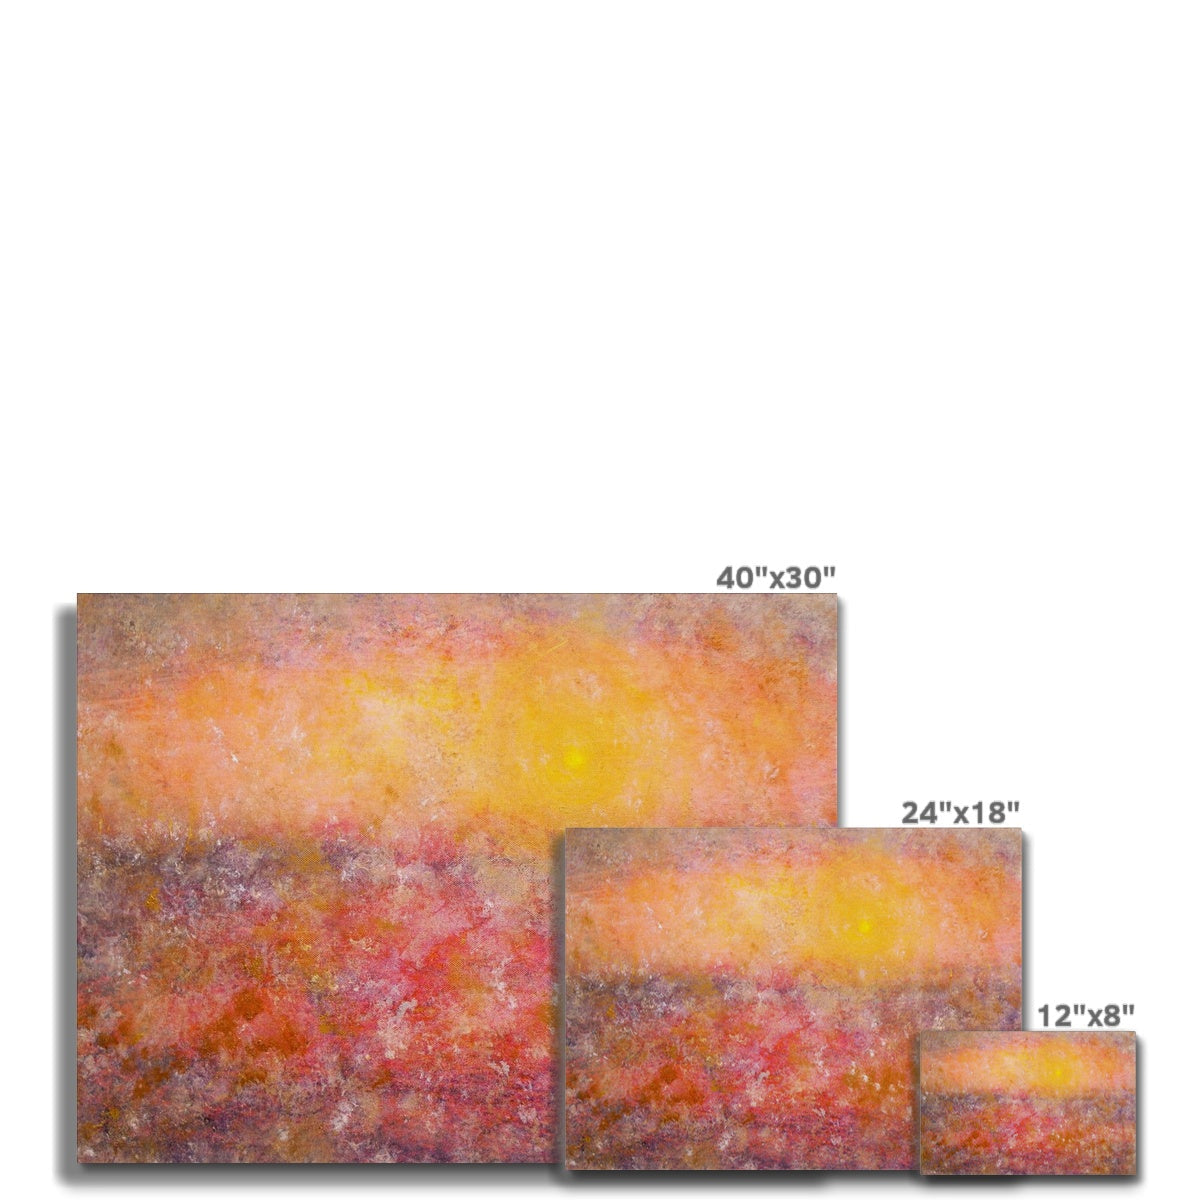 Sunrise Mist Horizon Abstract Painting | Canvas From Scotland-Contemporary Stretched Canvas Prints-Abstract & Impressionistic Art Gallery-Paintings, Prints, Homeware, Art Gifts From Scotland By Scottish Artist Kevin Hunter